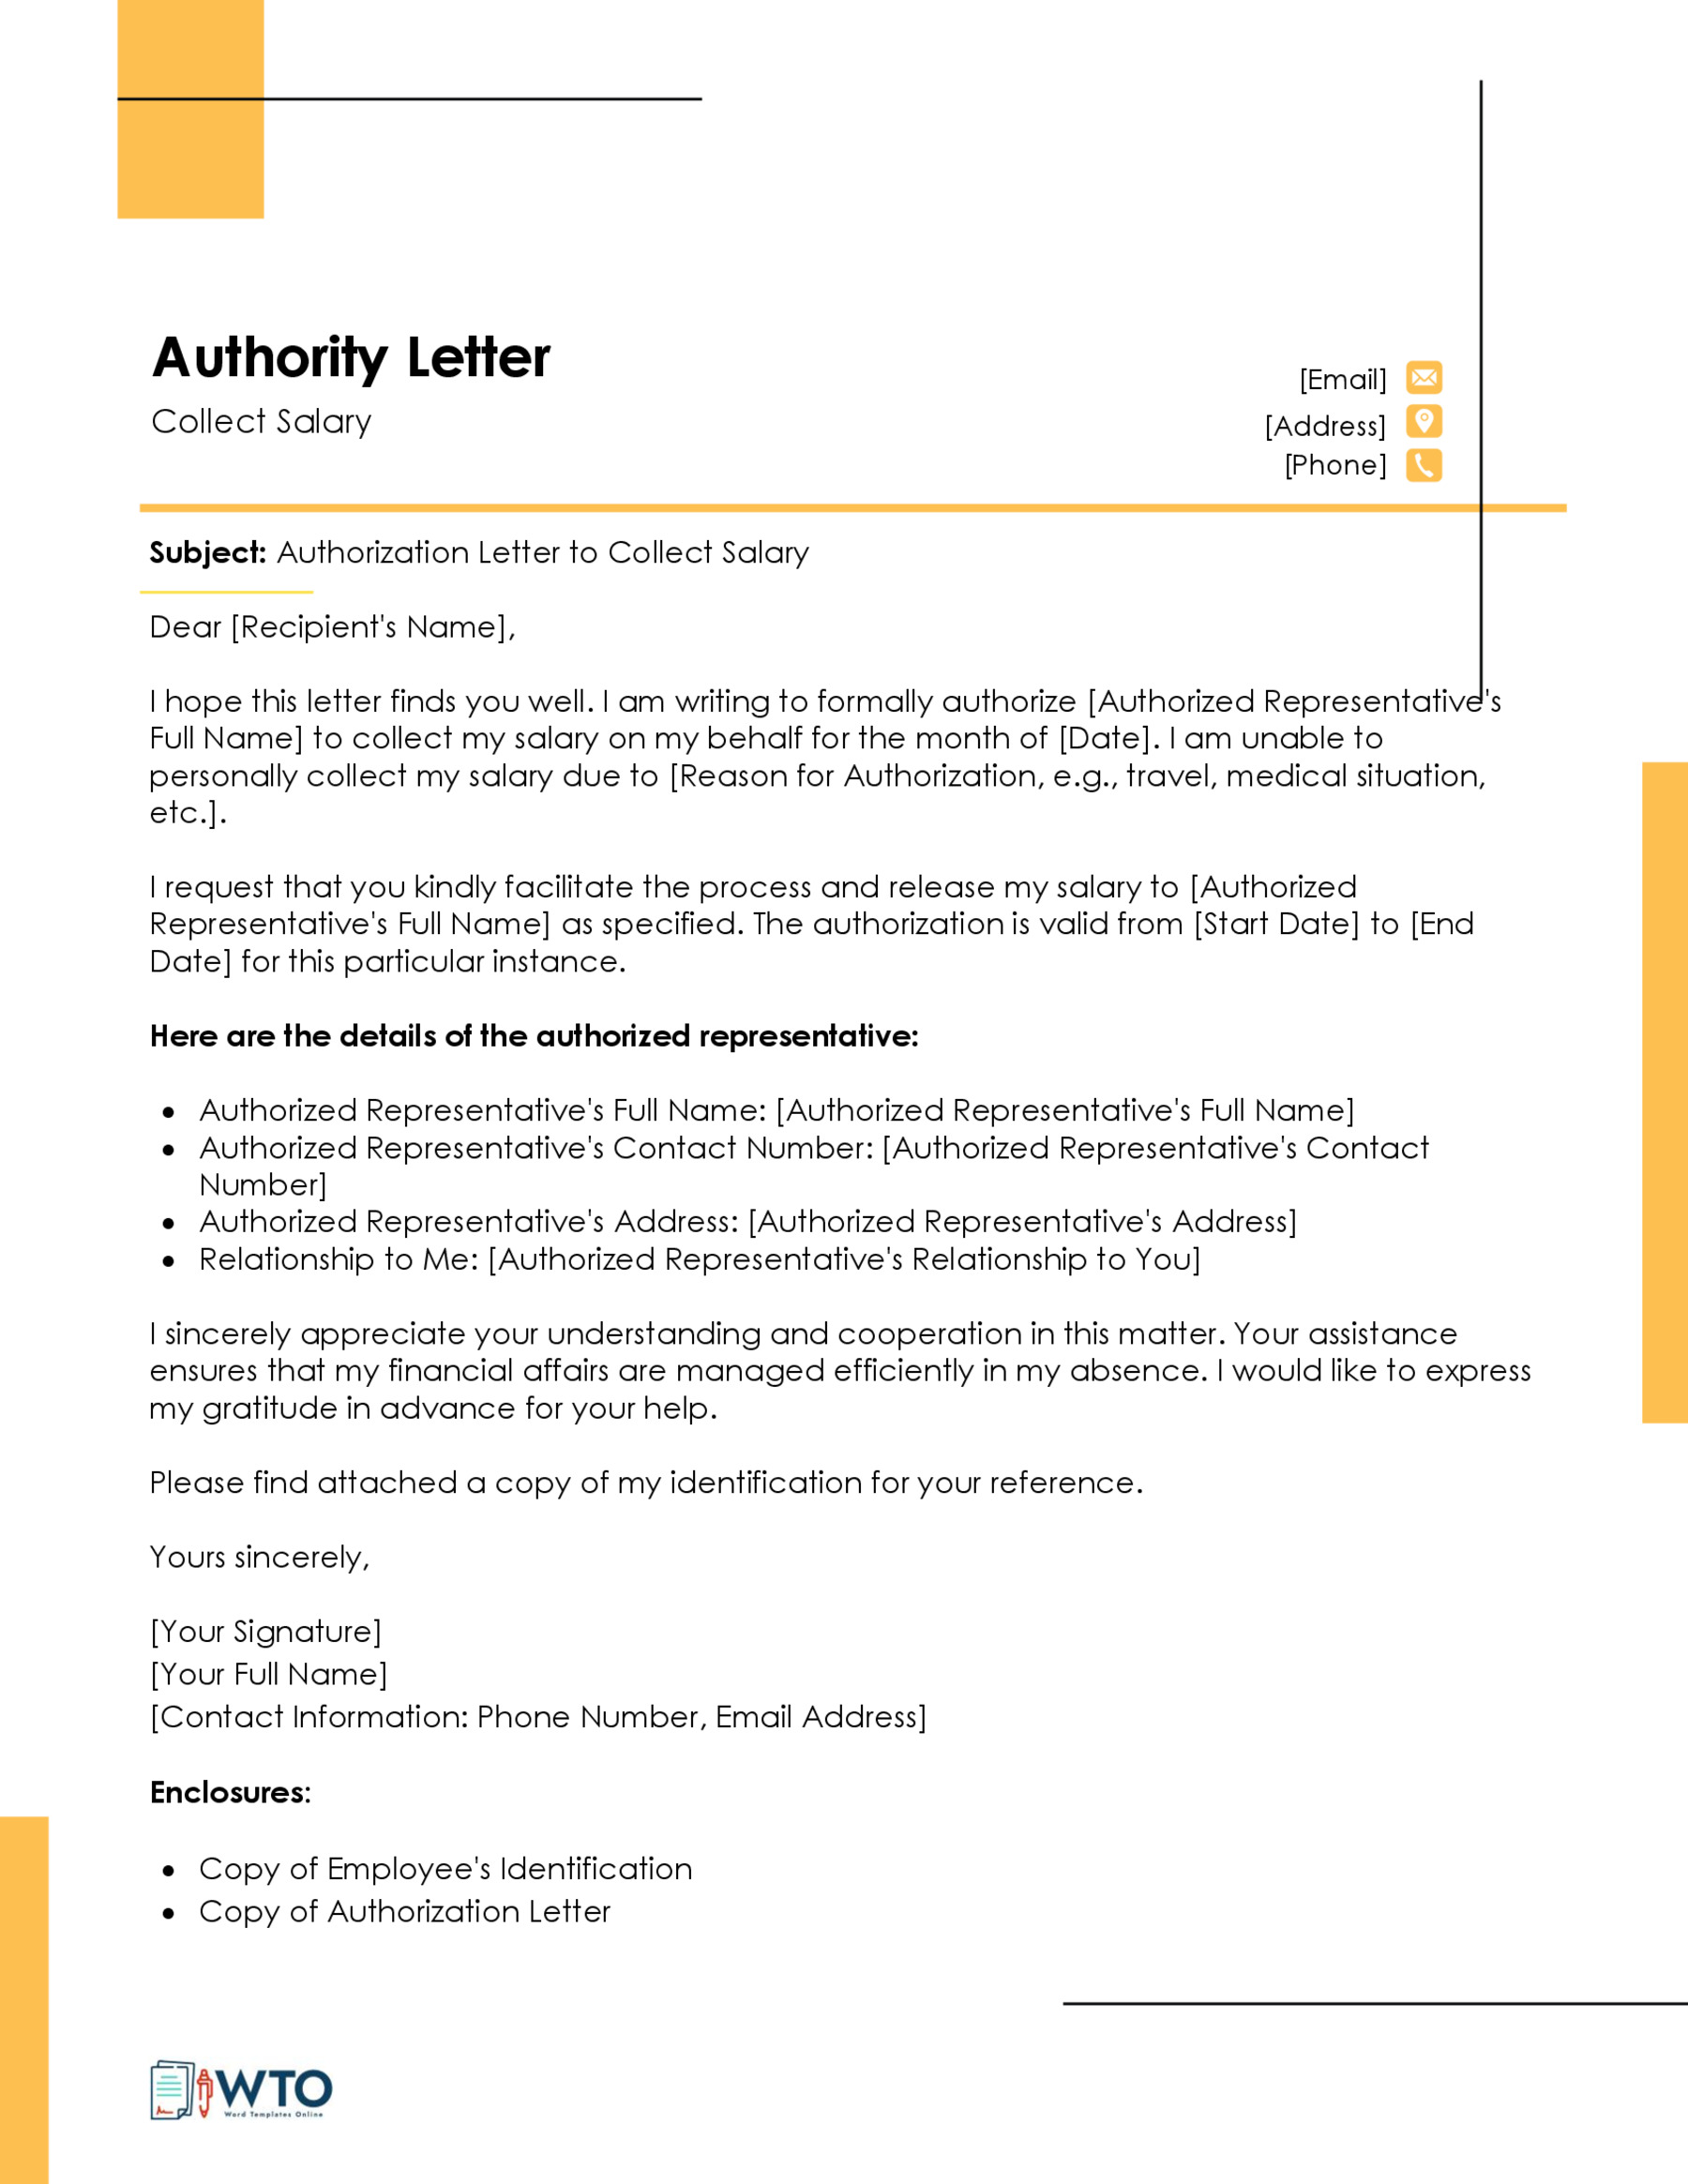 Authorization Letter to Collect Salary Template-Free Download